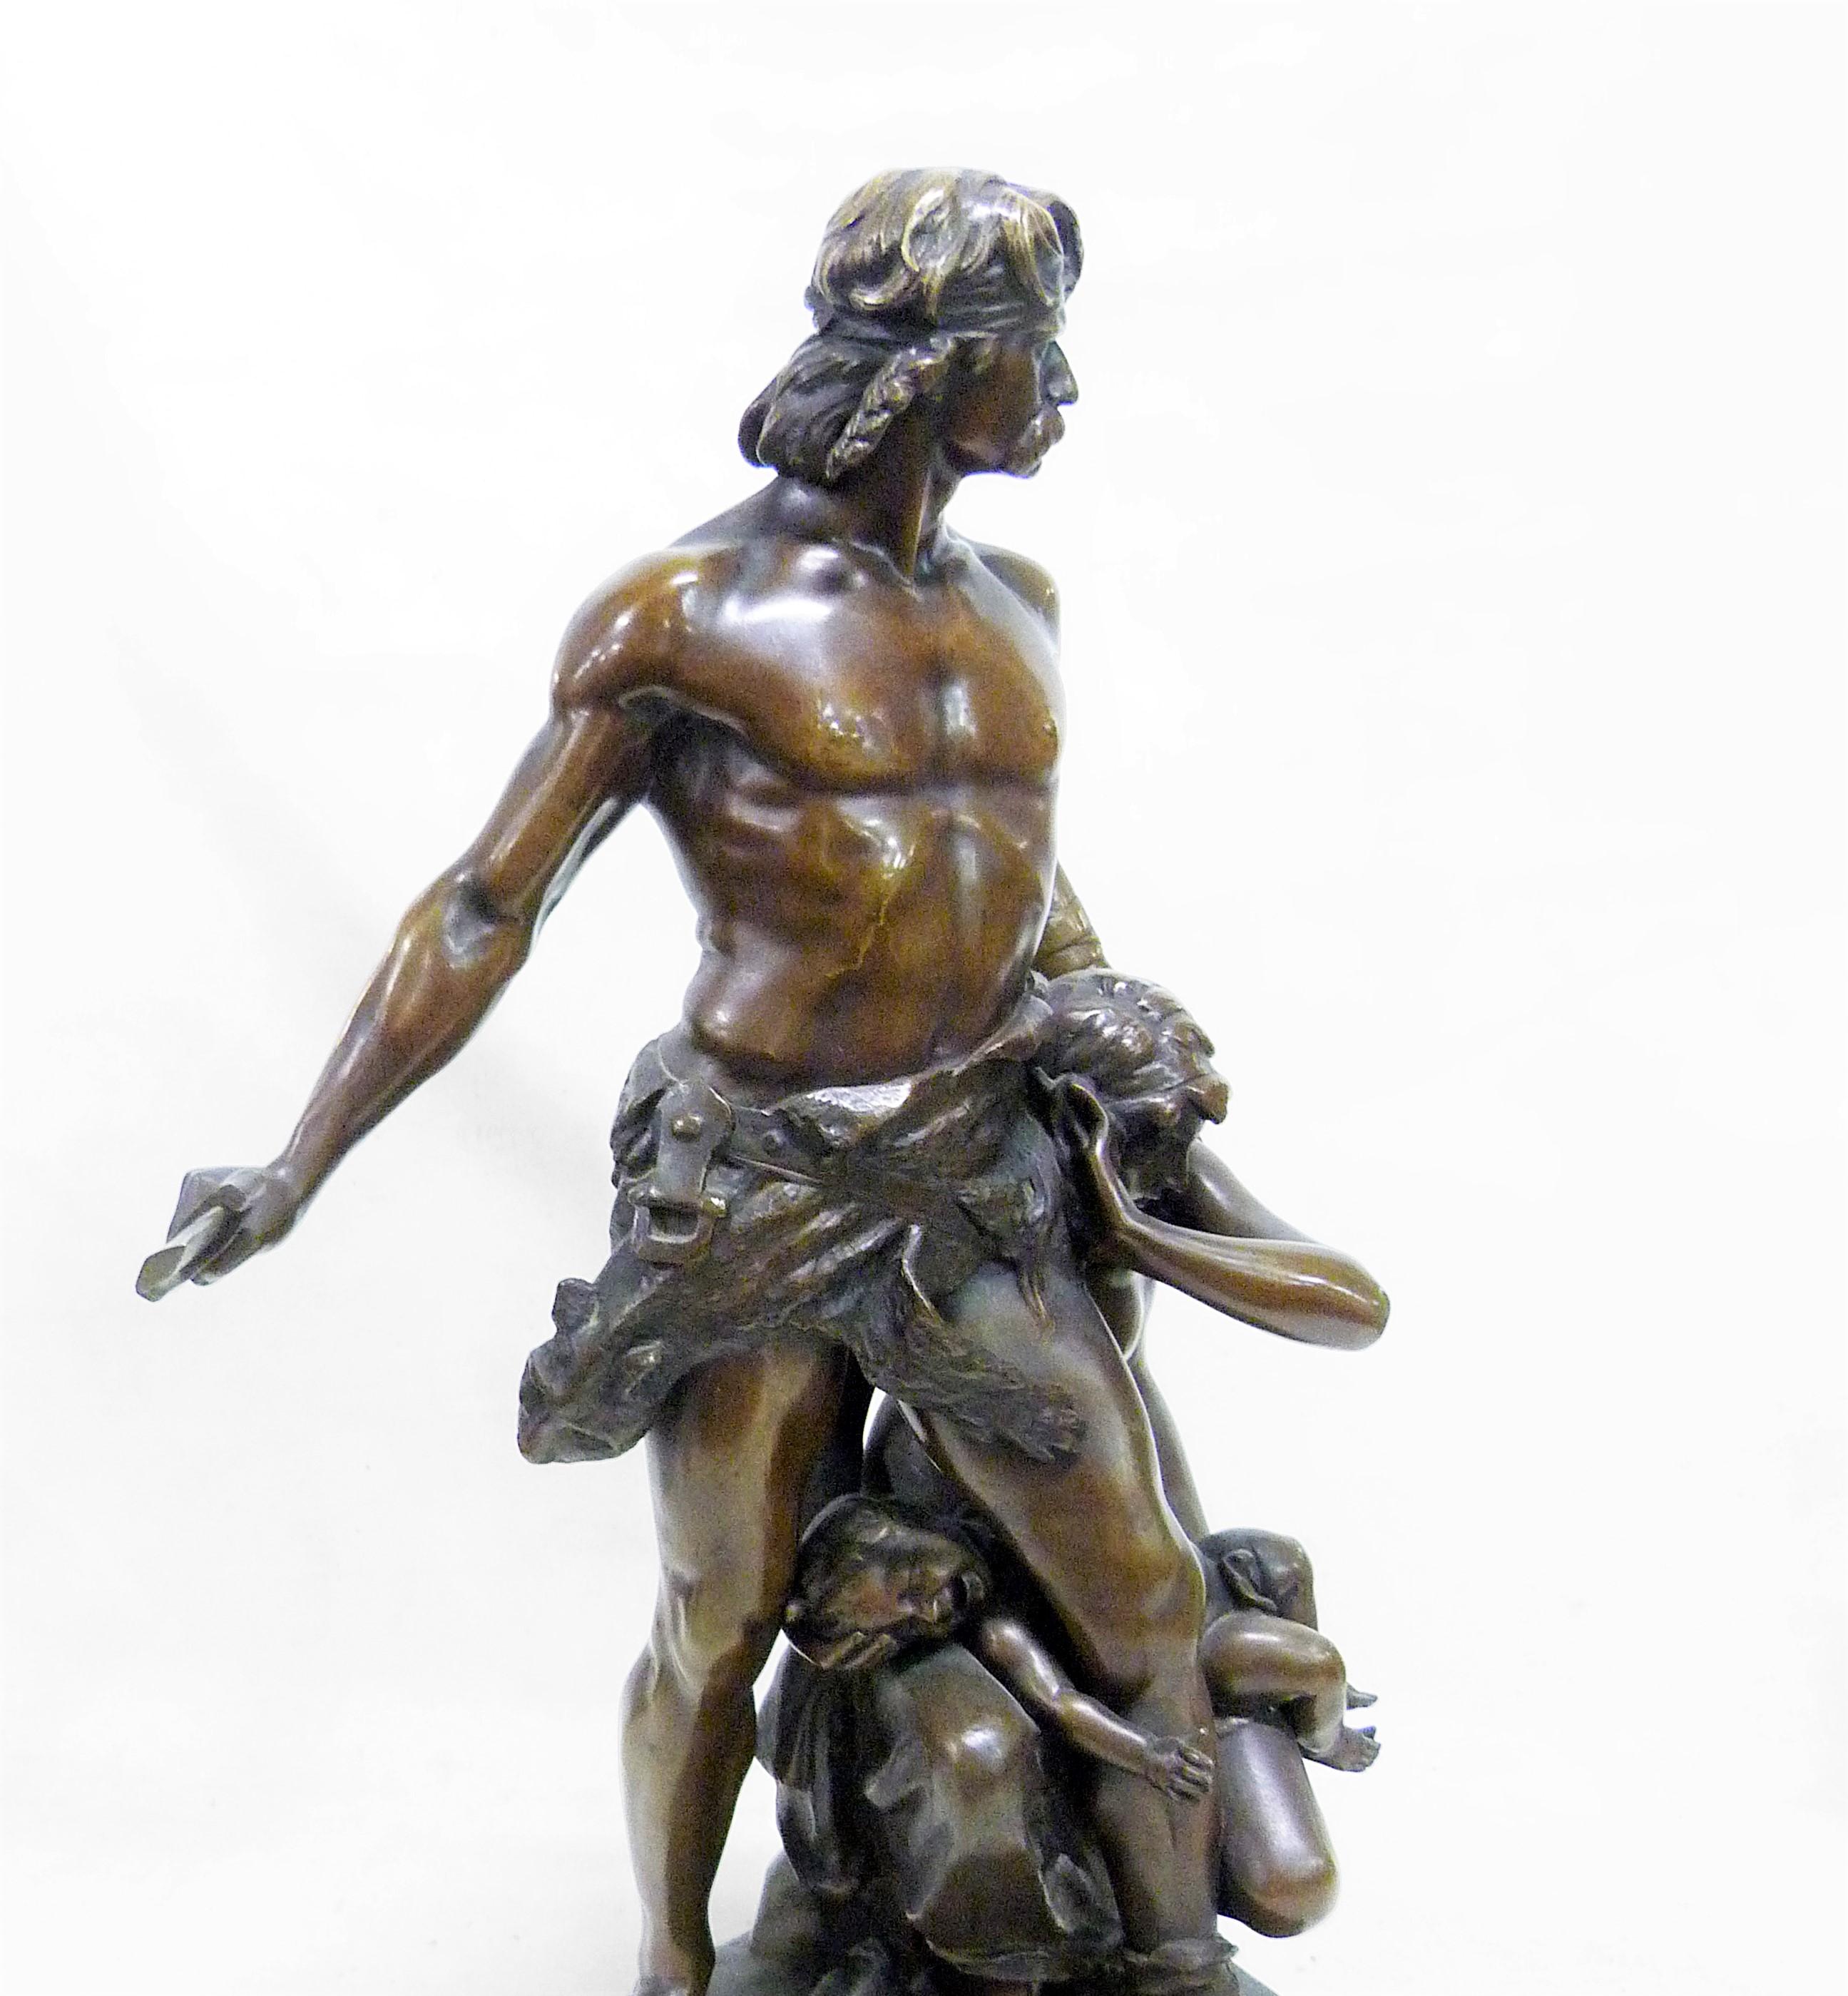 Massive bronze group with medal patina depicting a standing Gaulish warrior protecting his wife and child scared. Signature of the sculptor Boisseau on the base, titled in a cartouche 